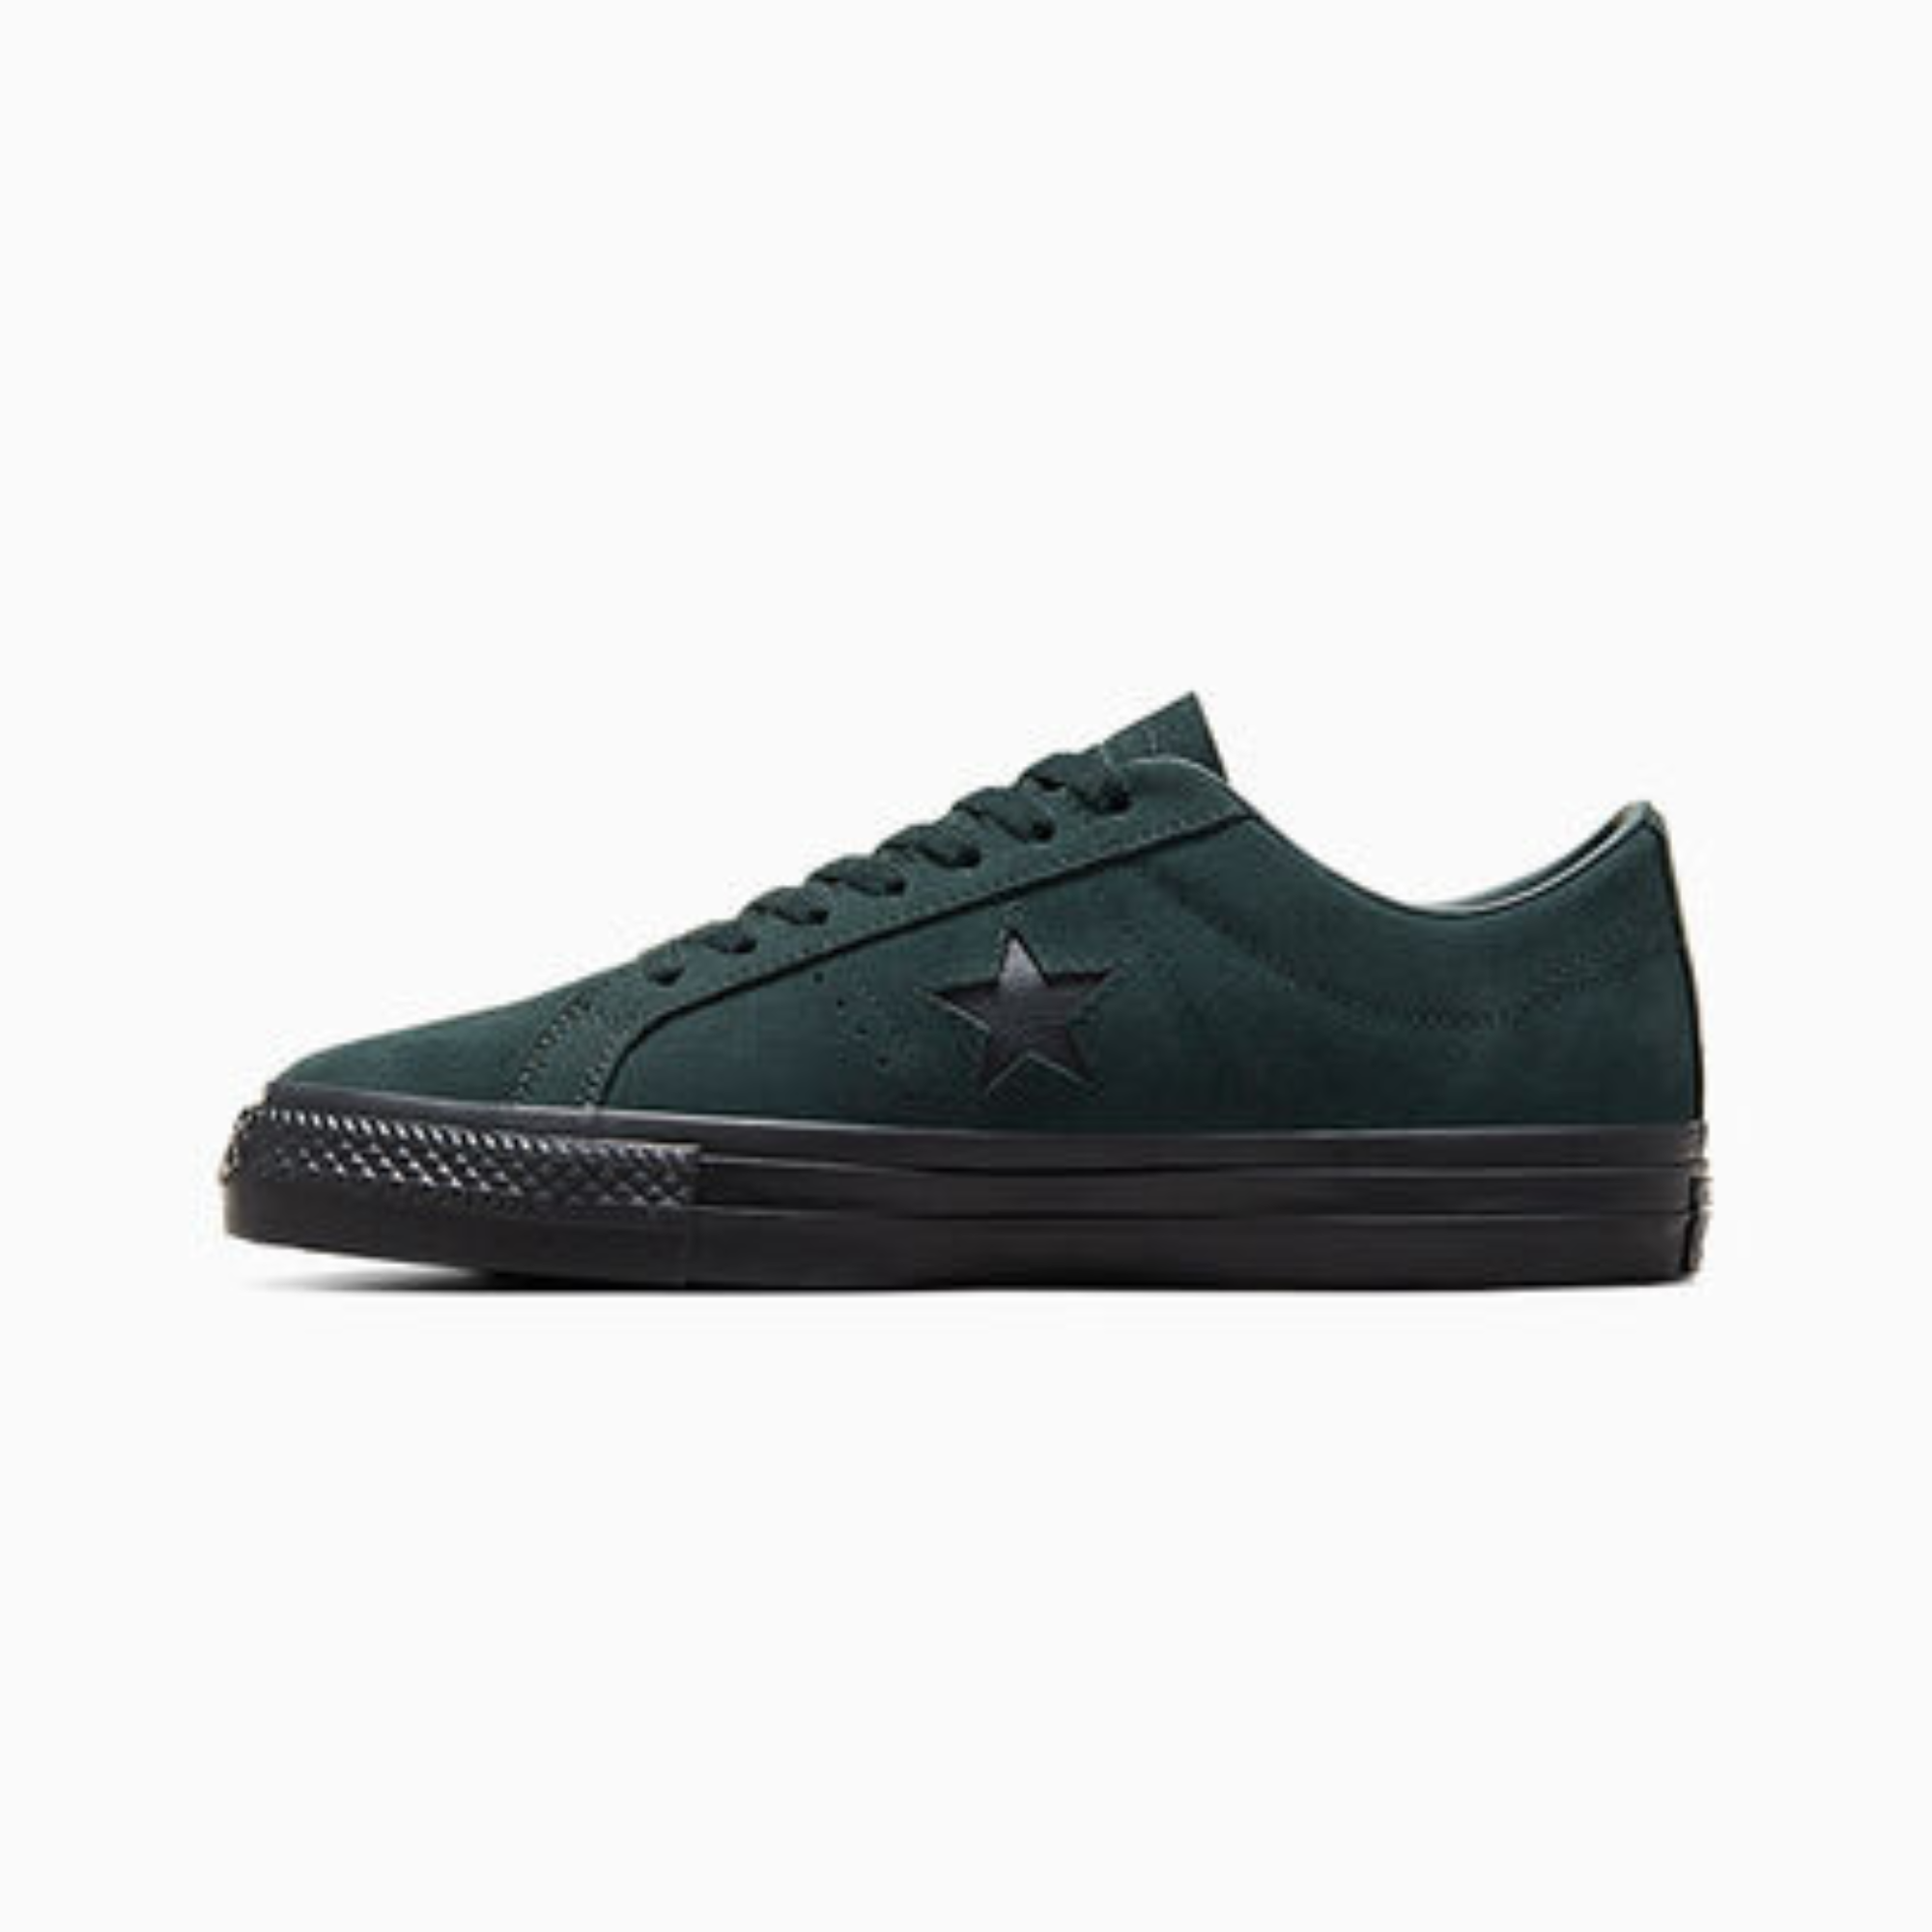 Converse One Star Pro Classic Suede Secret Pines Green